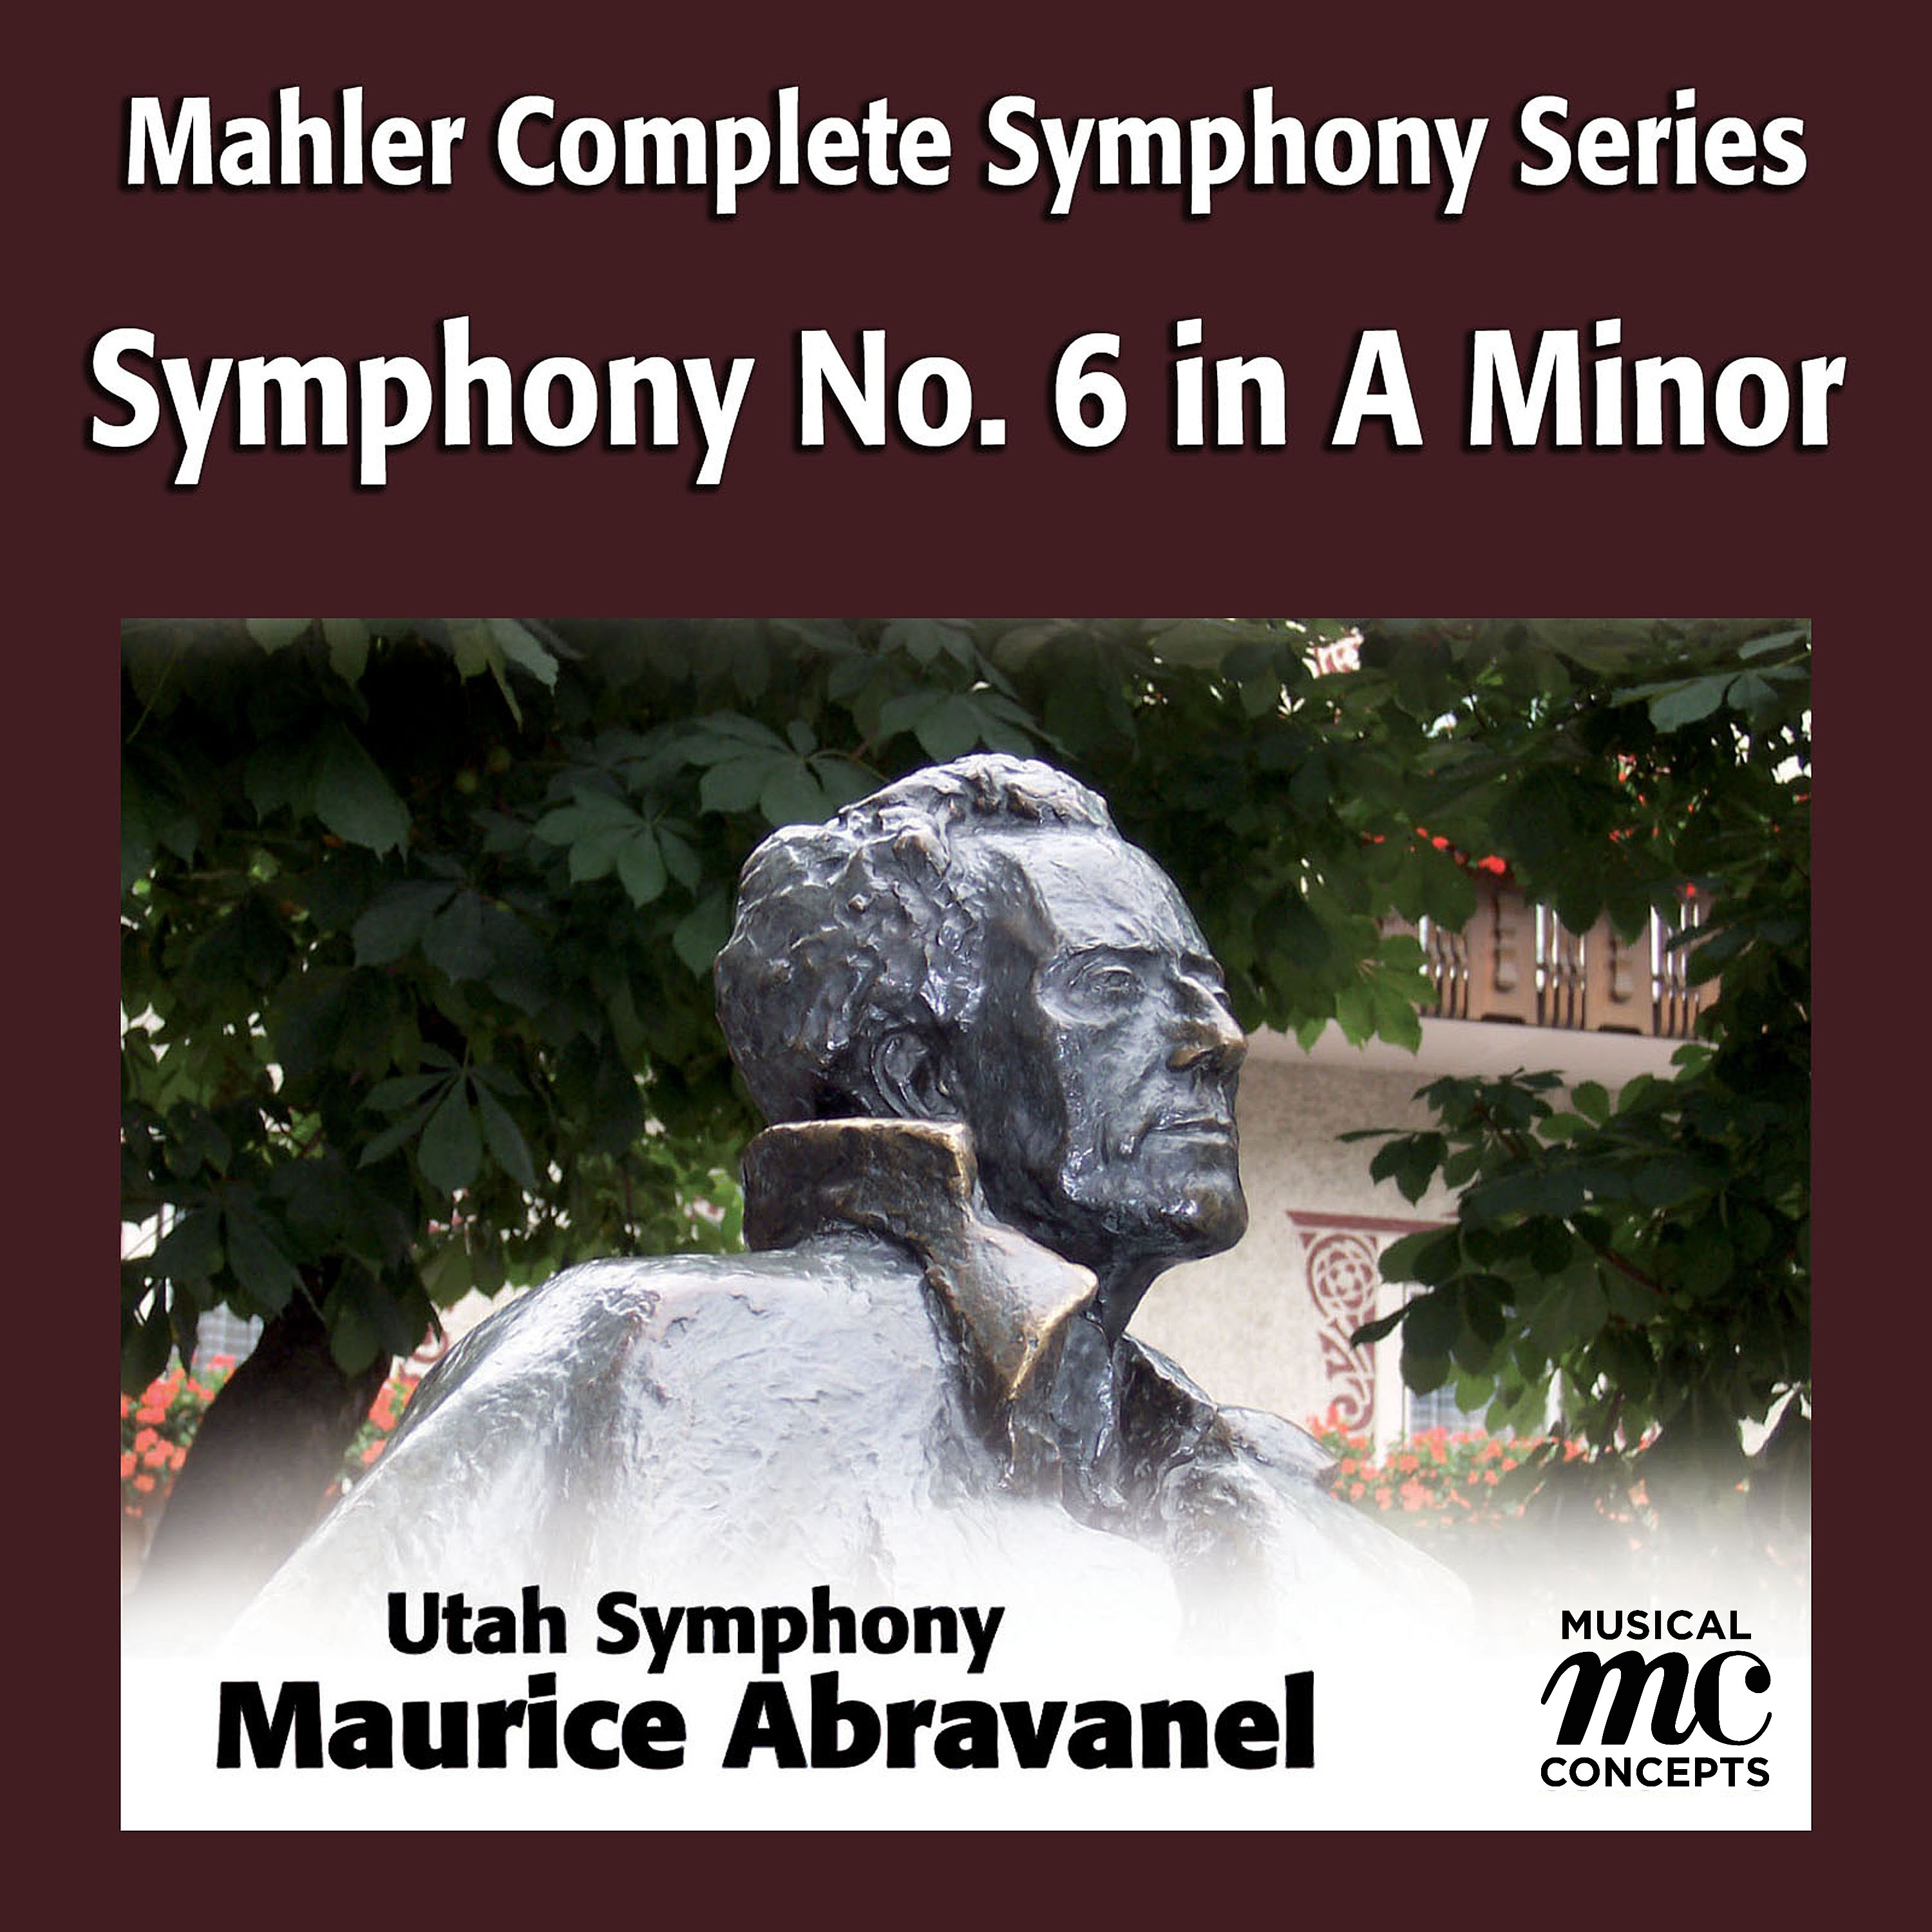 Mahler Complete Symphony Series: Symphony No. 6 in A Minor